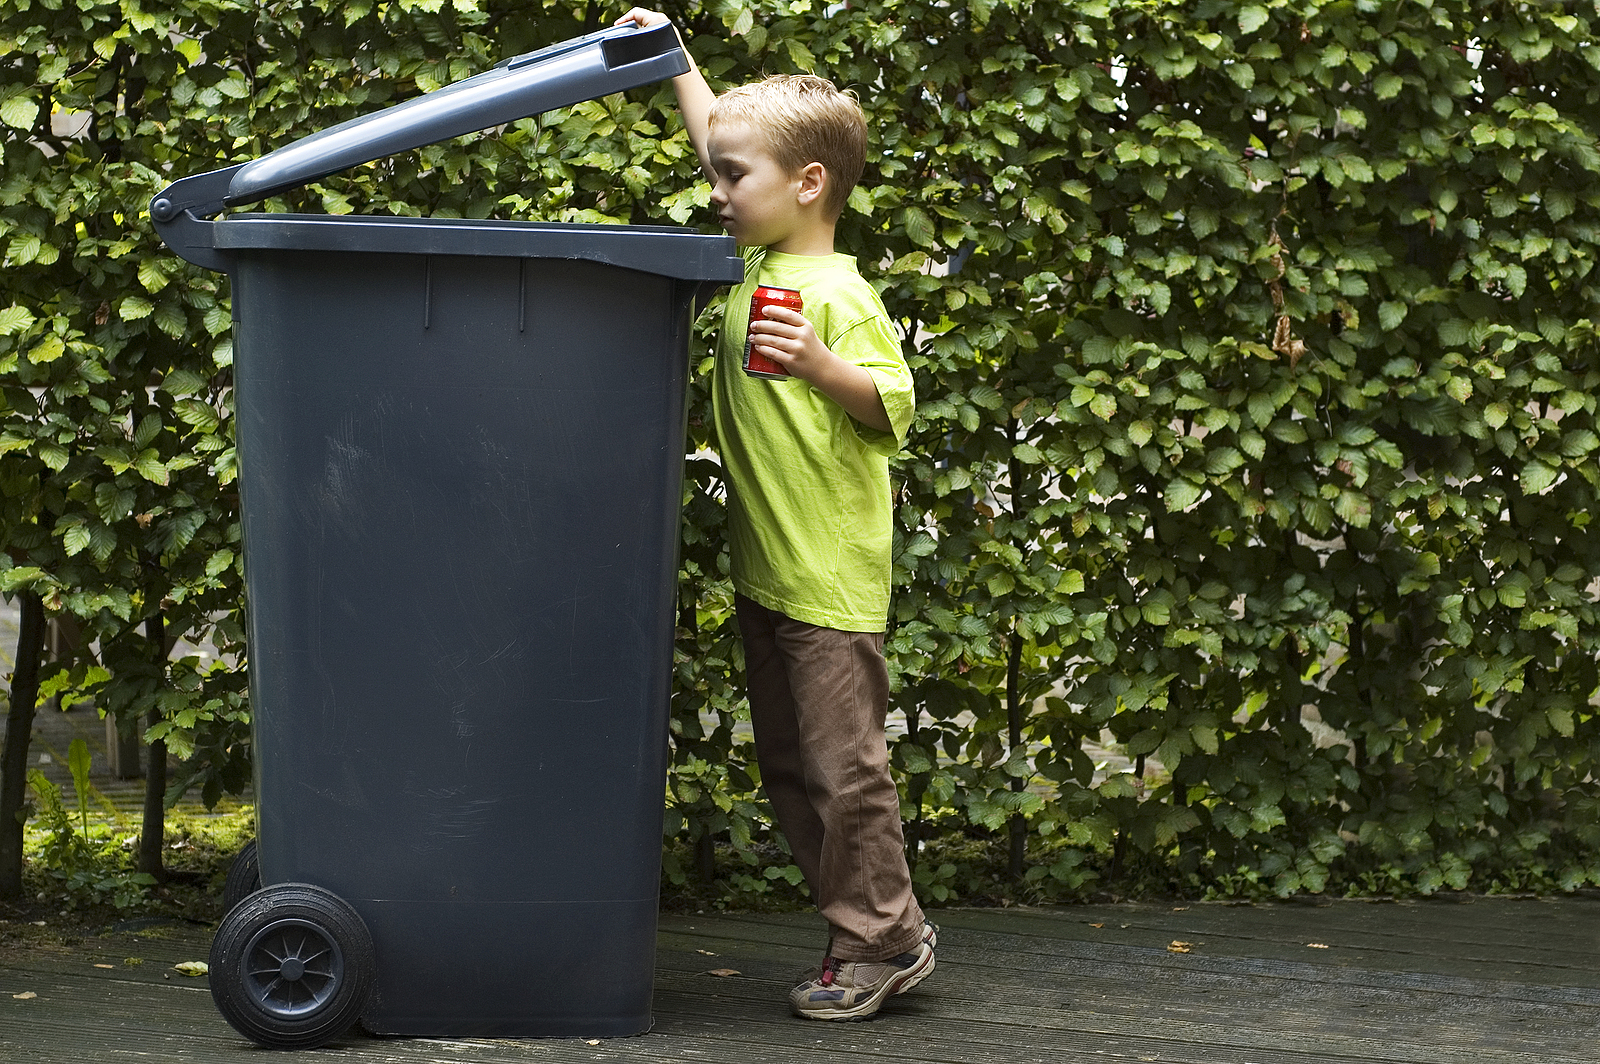 Boy wanting to throw a can in the container he is learning to be aware that recycling is important.